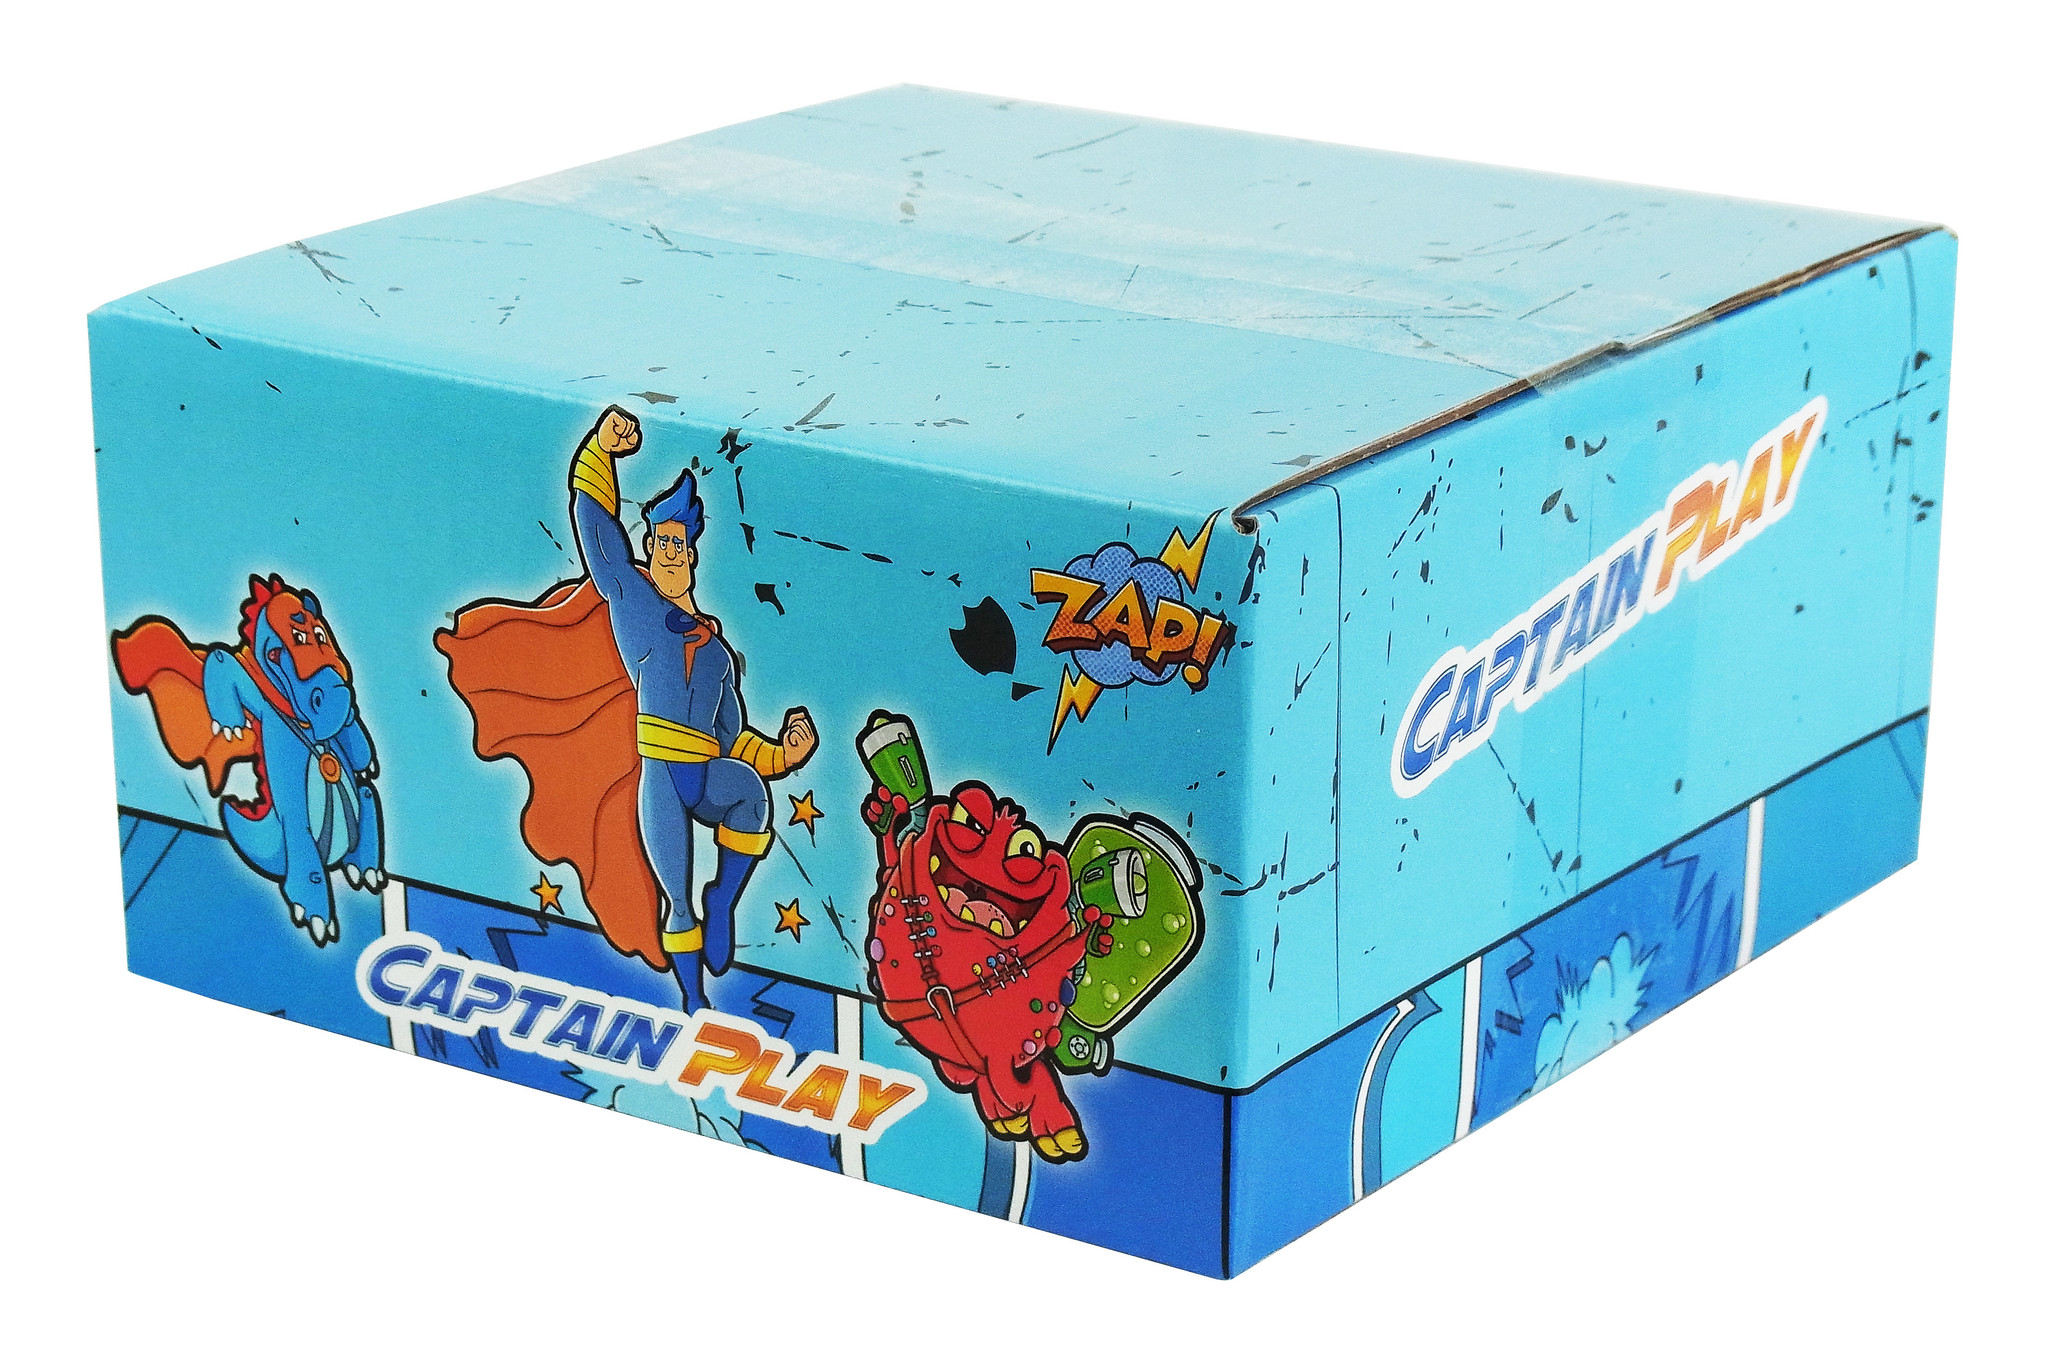 CAPTAIN PLAY Soft Strawberry Explosion, 2kg